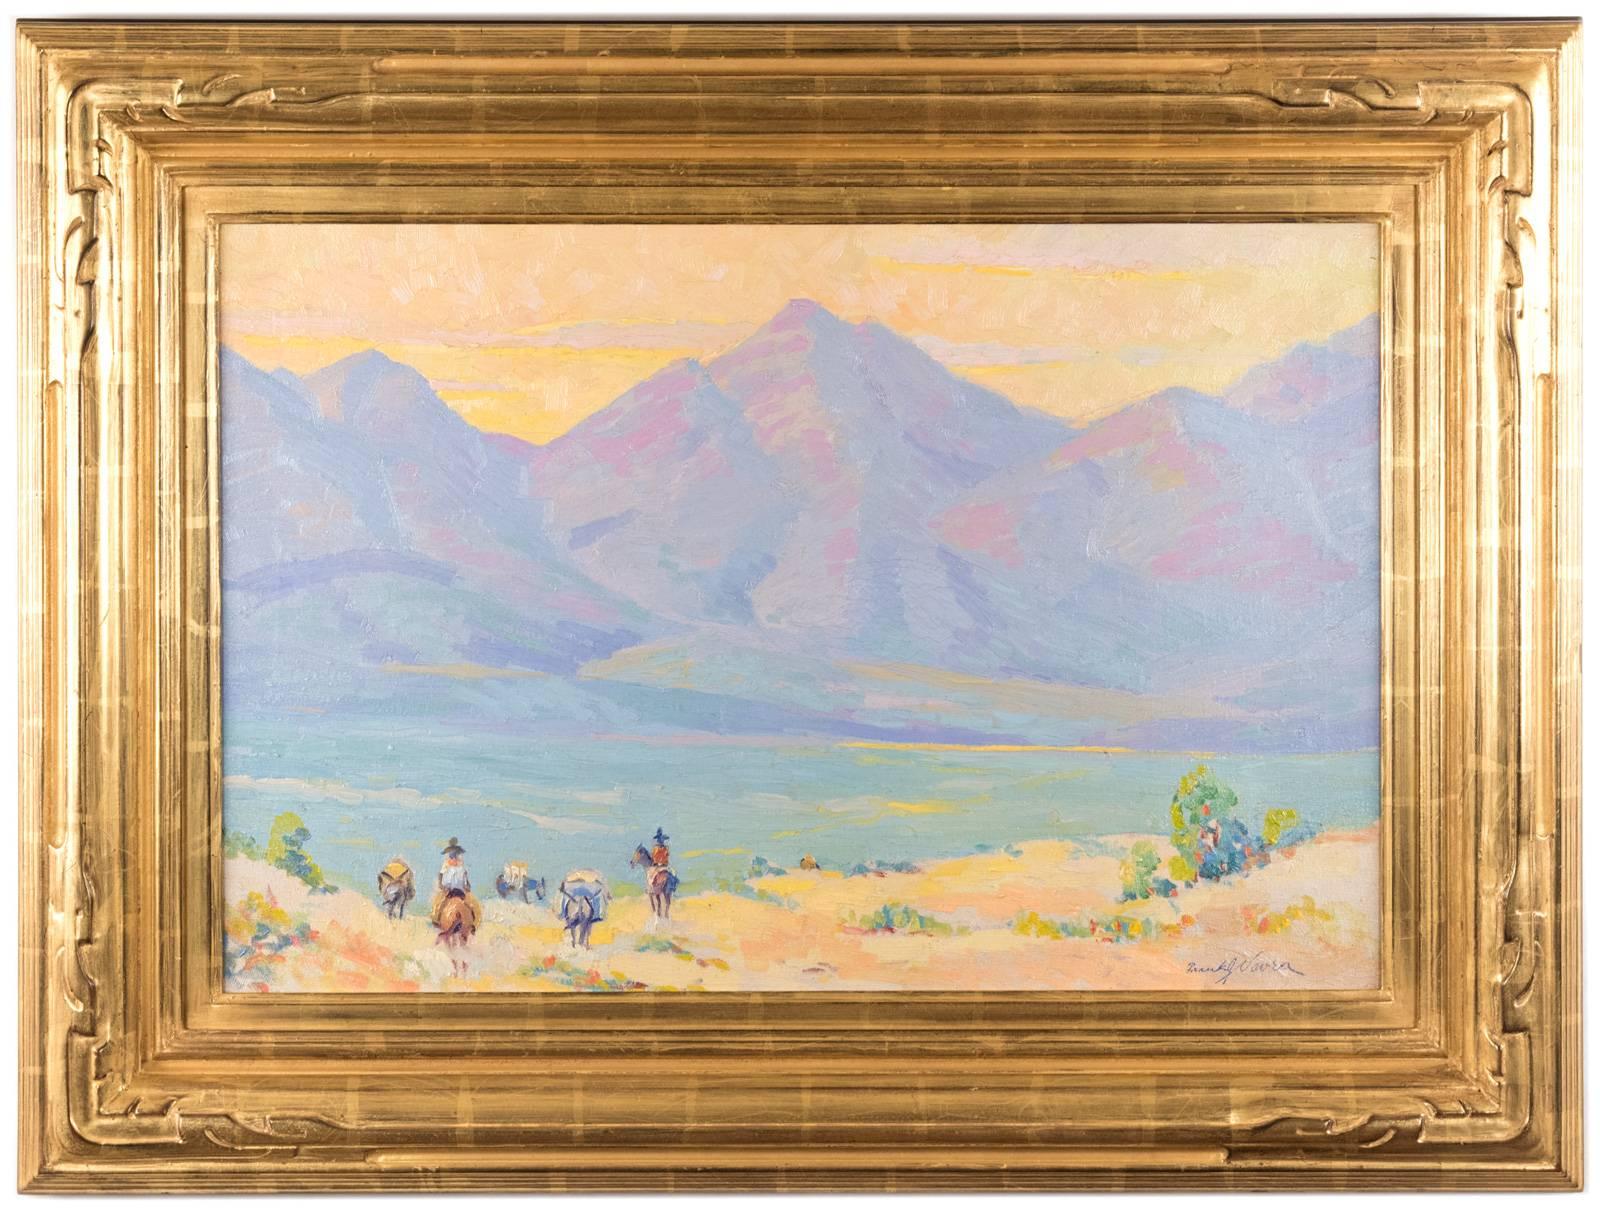 Frank J Vavra (1892 - 1967) began his career as a self-educated artist before enrolling in the Denver Art Academy. His early impressions of an pioneer town, Wyoming's crossroads center since the earliest Indian days, were often colorful material for